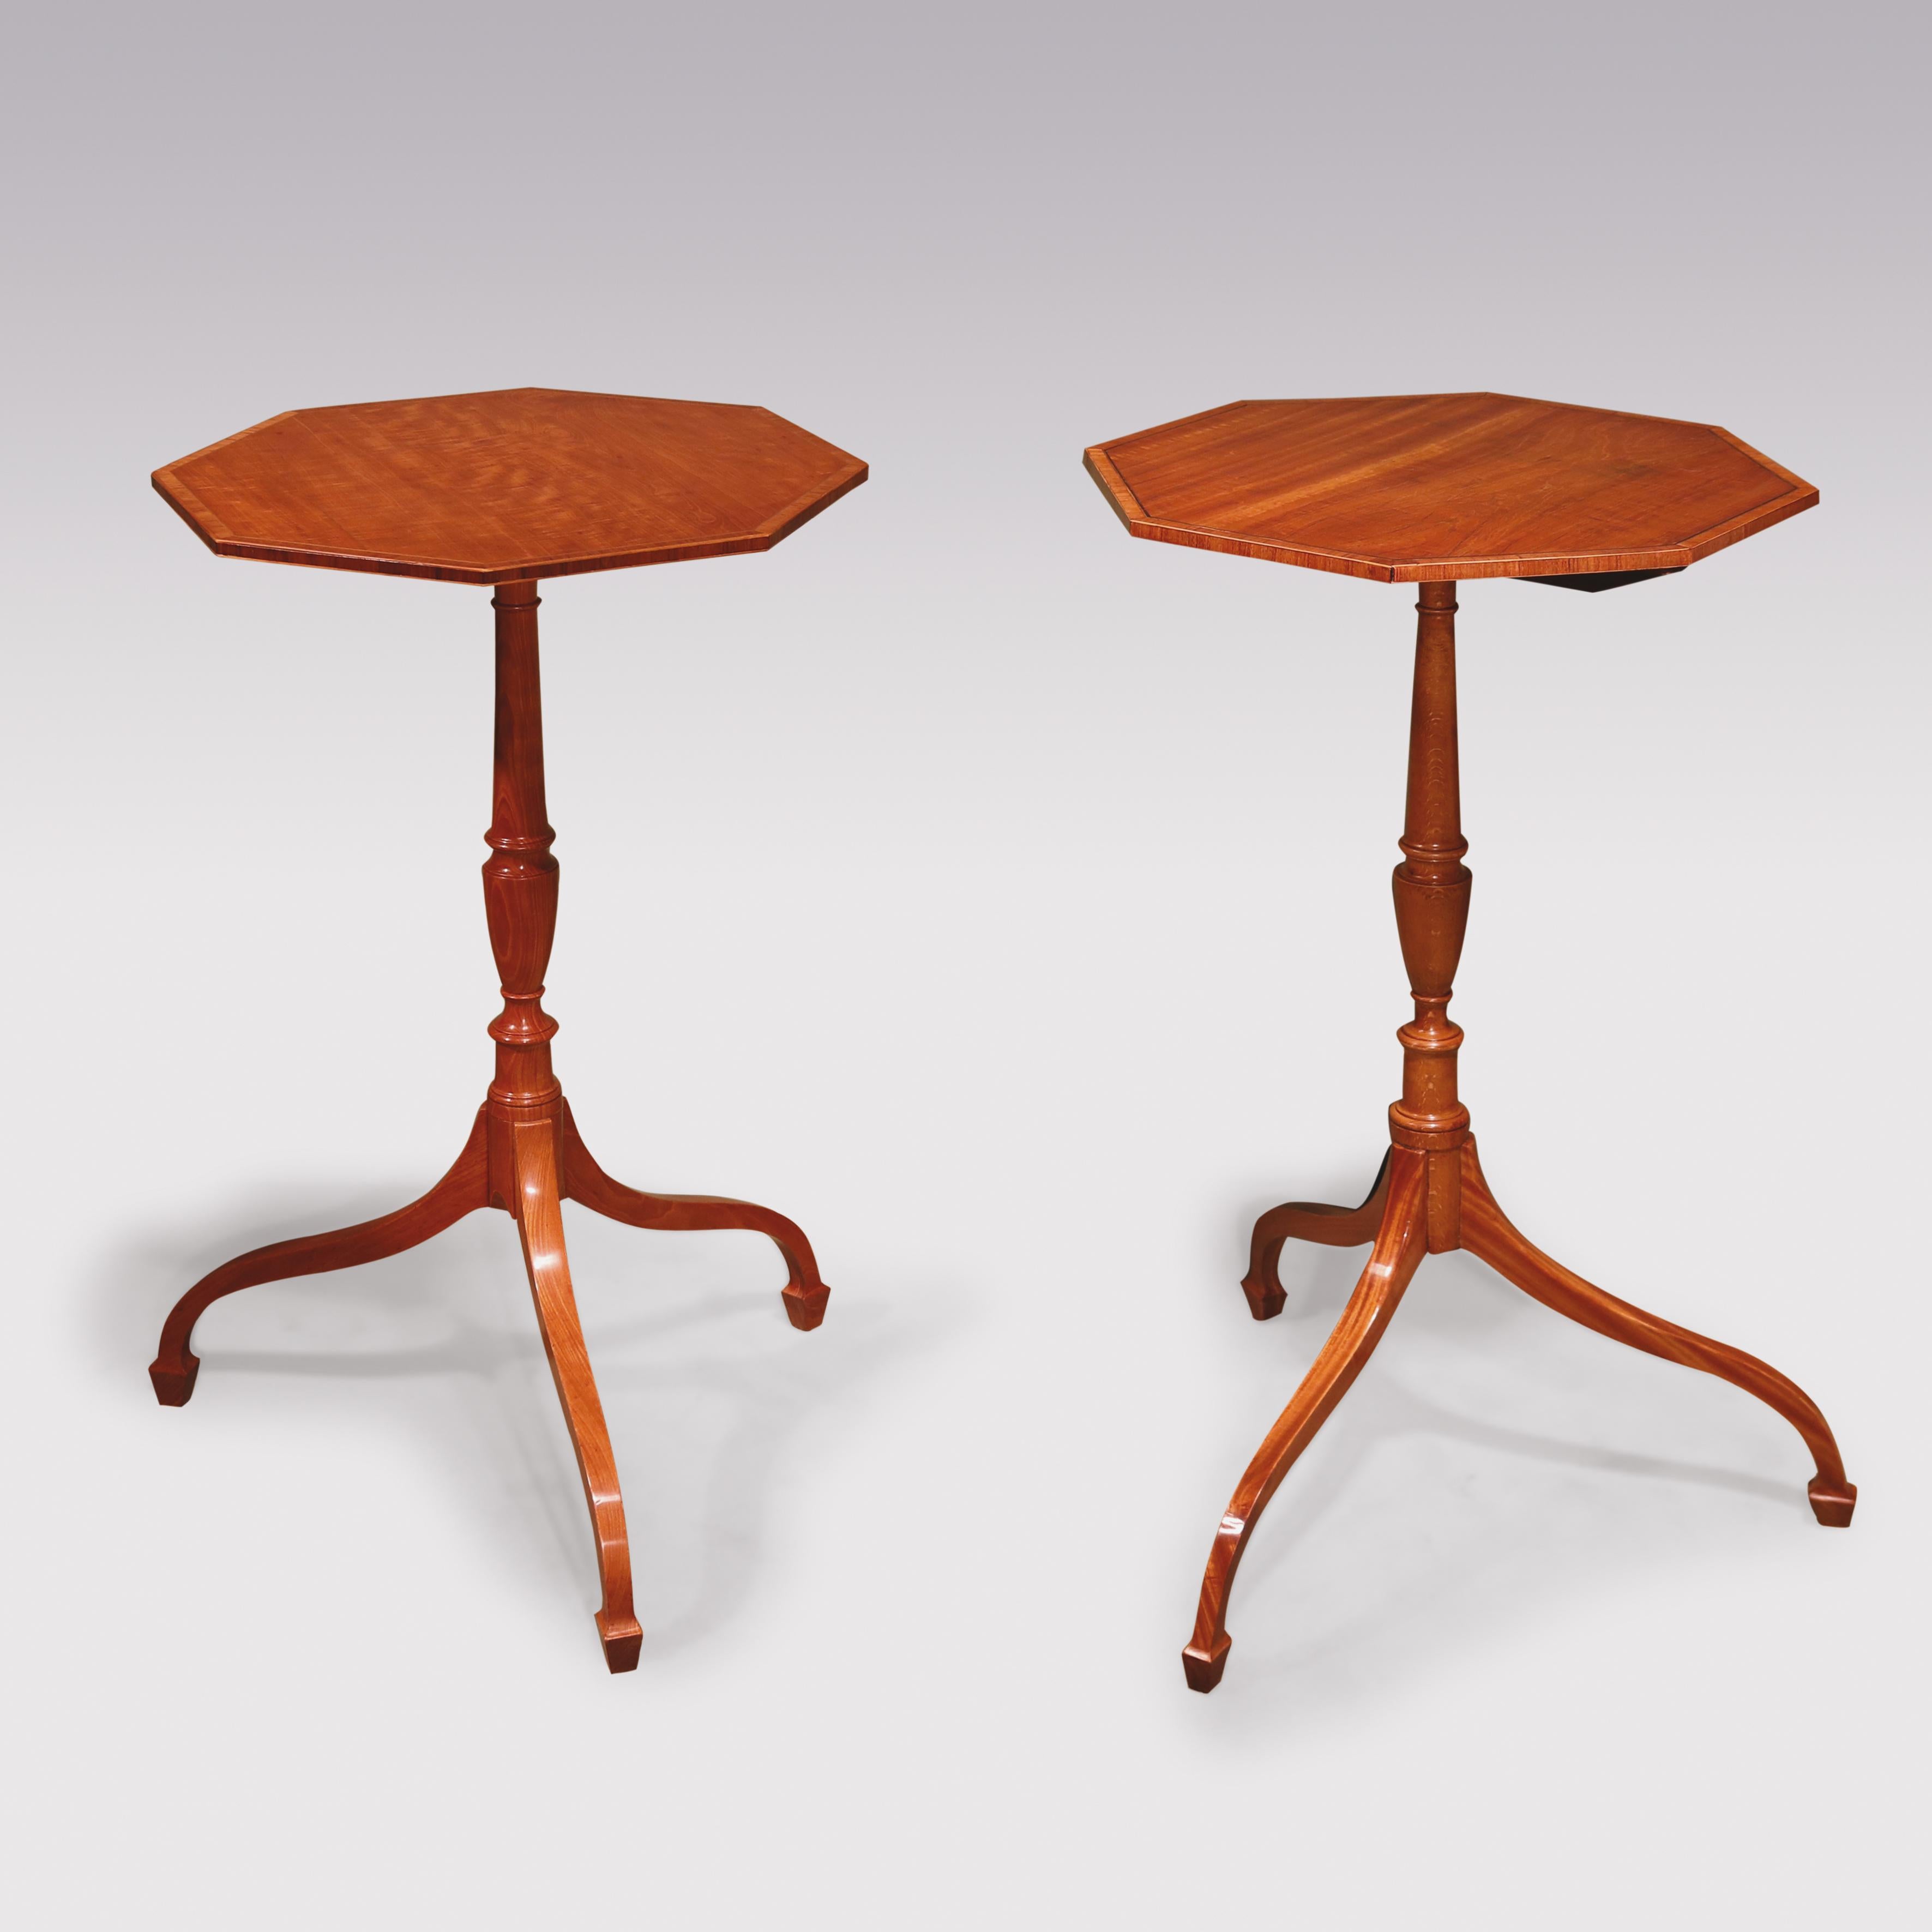 A matched pair of late 18th Century Sheraton period satinwood Tripod Tables, having tulipwood crossbanded octagonal tops, raised on slender vase-turned stems, supported on umbrella shaped legs, ending on spade toes.